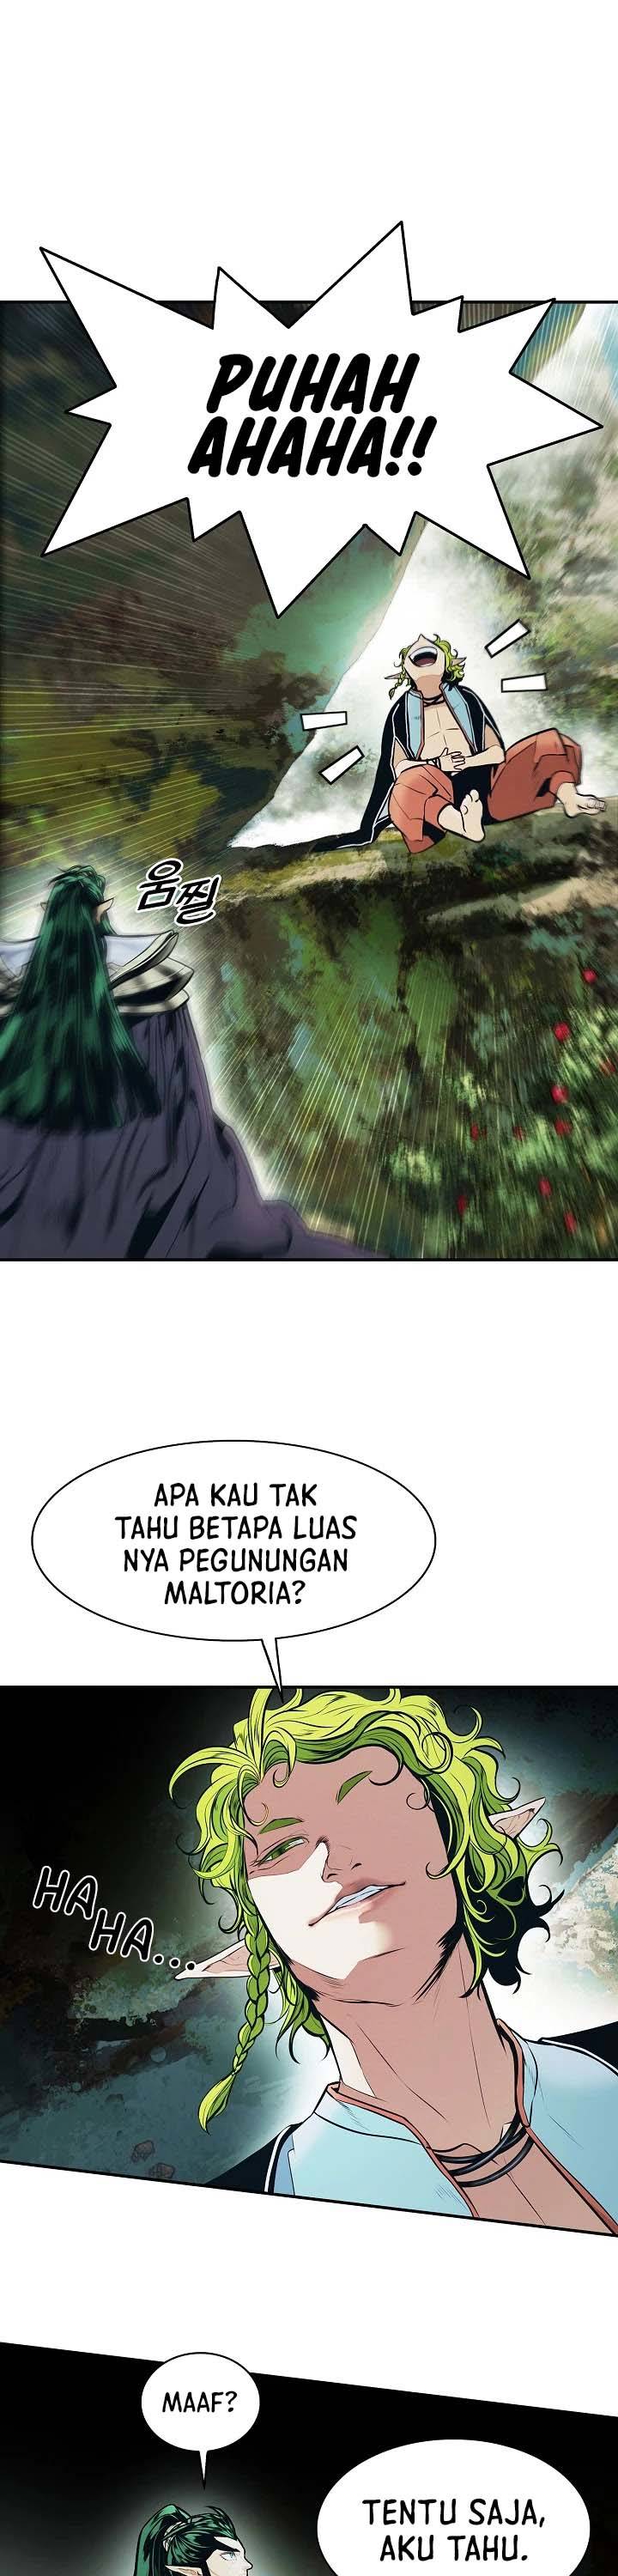 Mookhyang Dark Lady Chapter 152